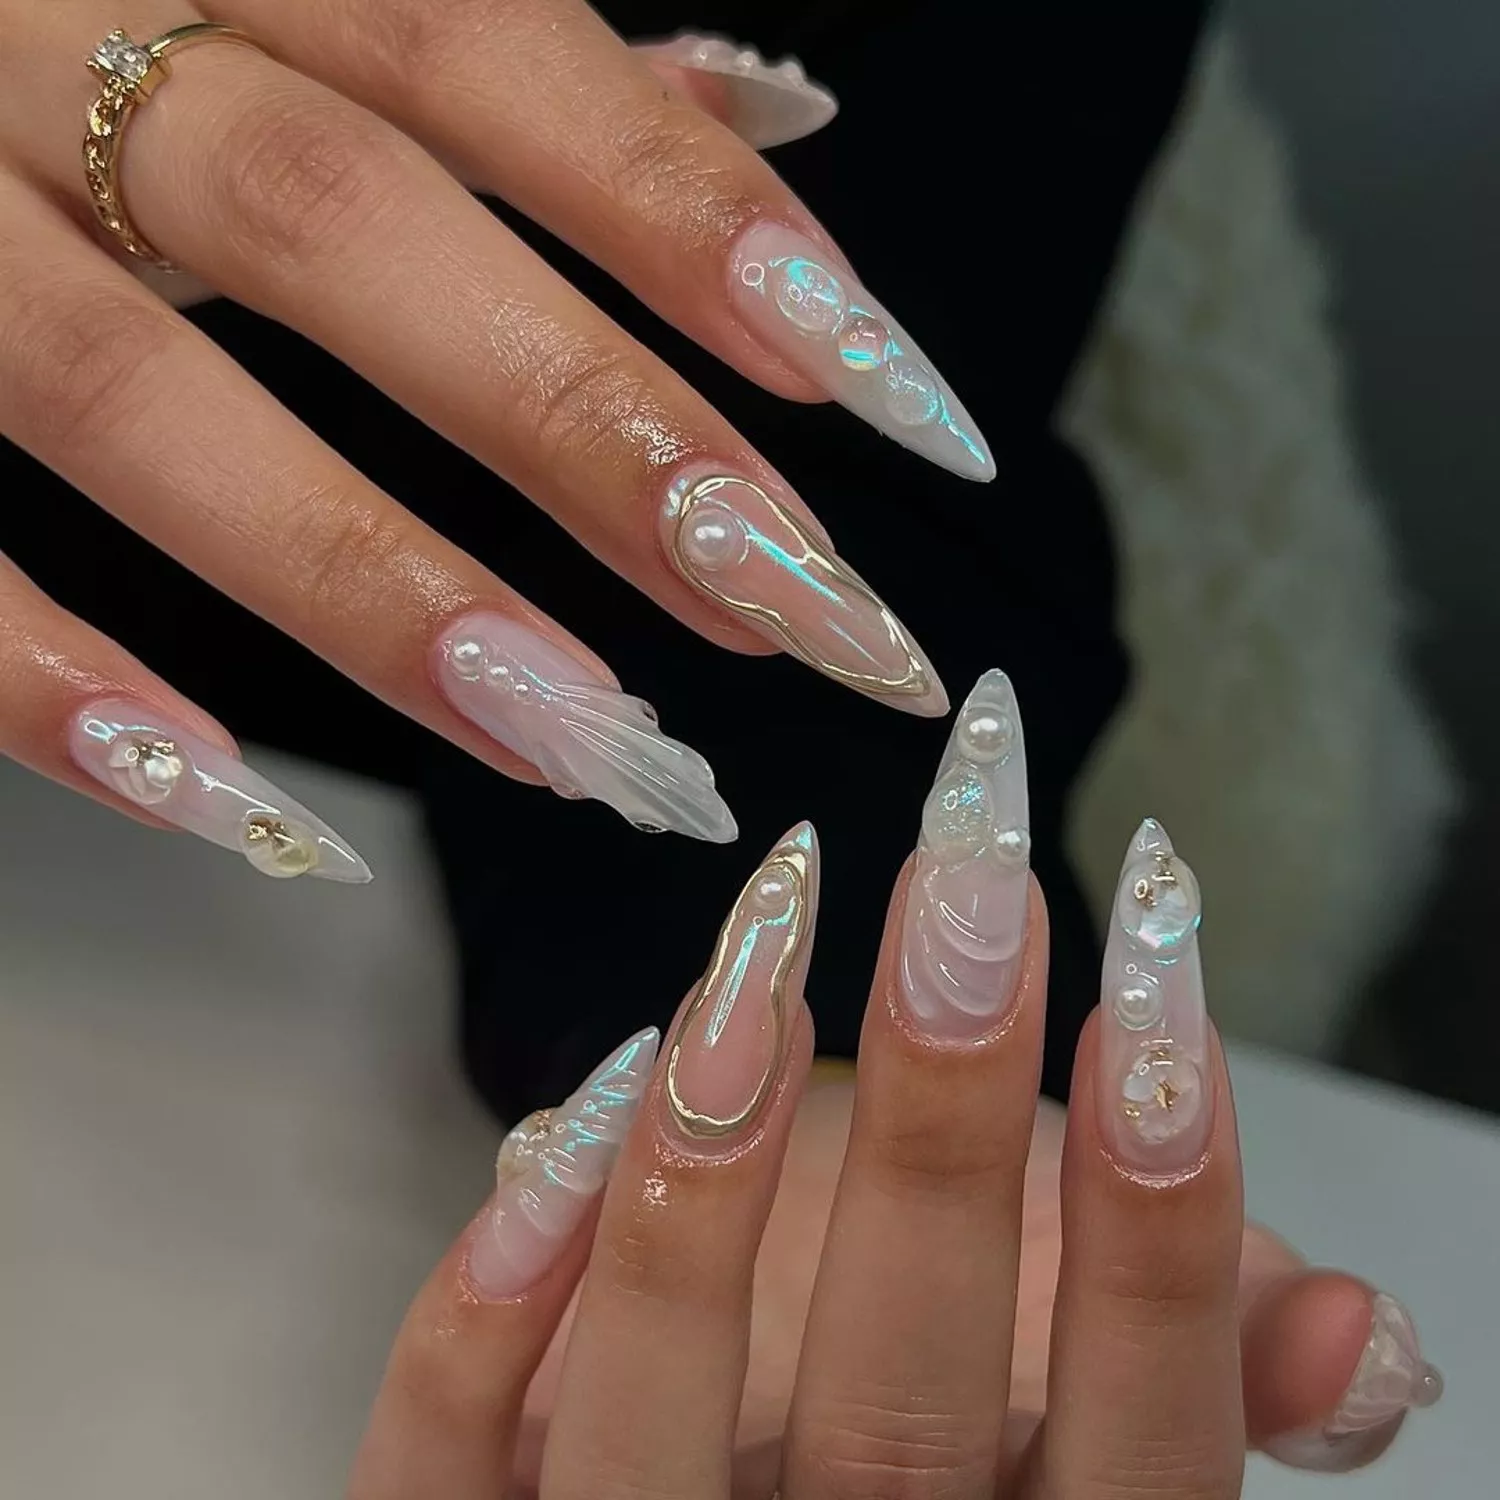 Pearlescent acrylic nails with 3D sculpted details, pearls, and gold accents